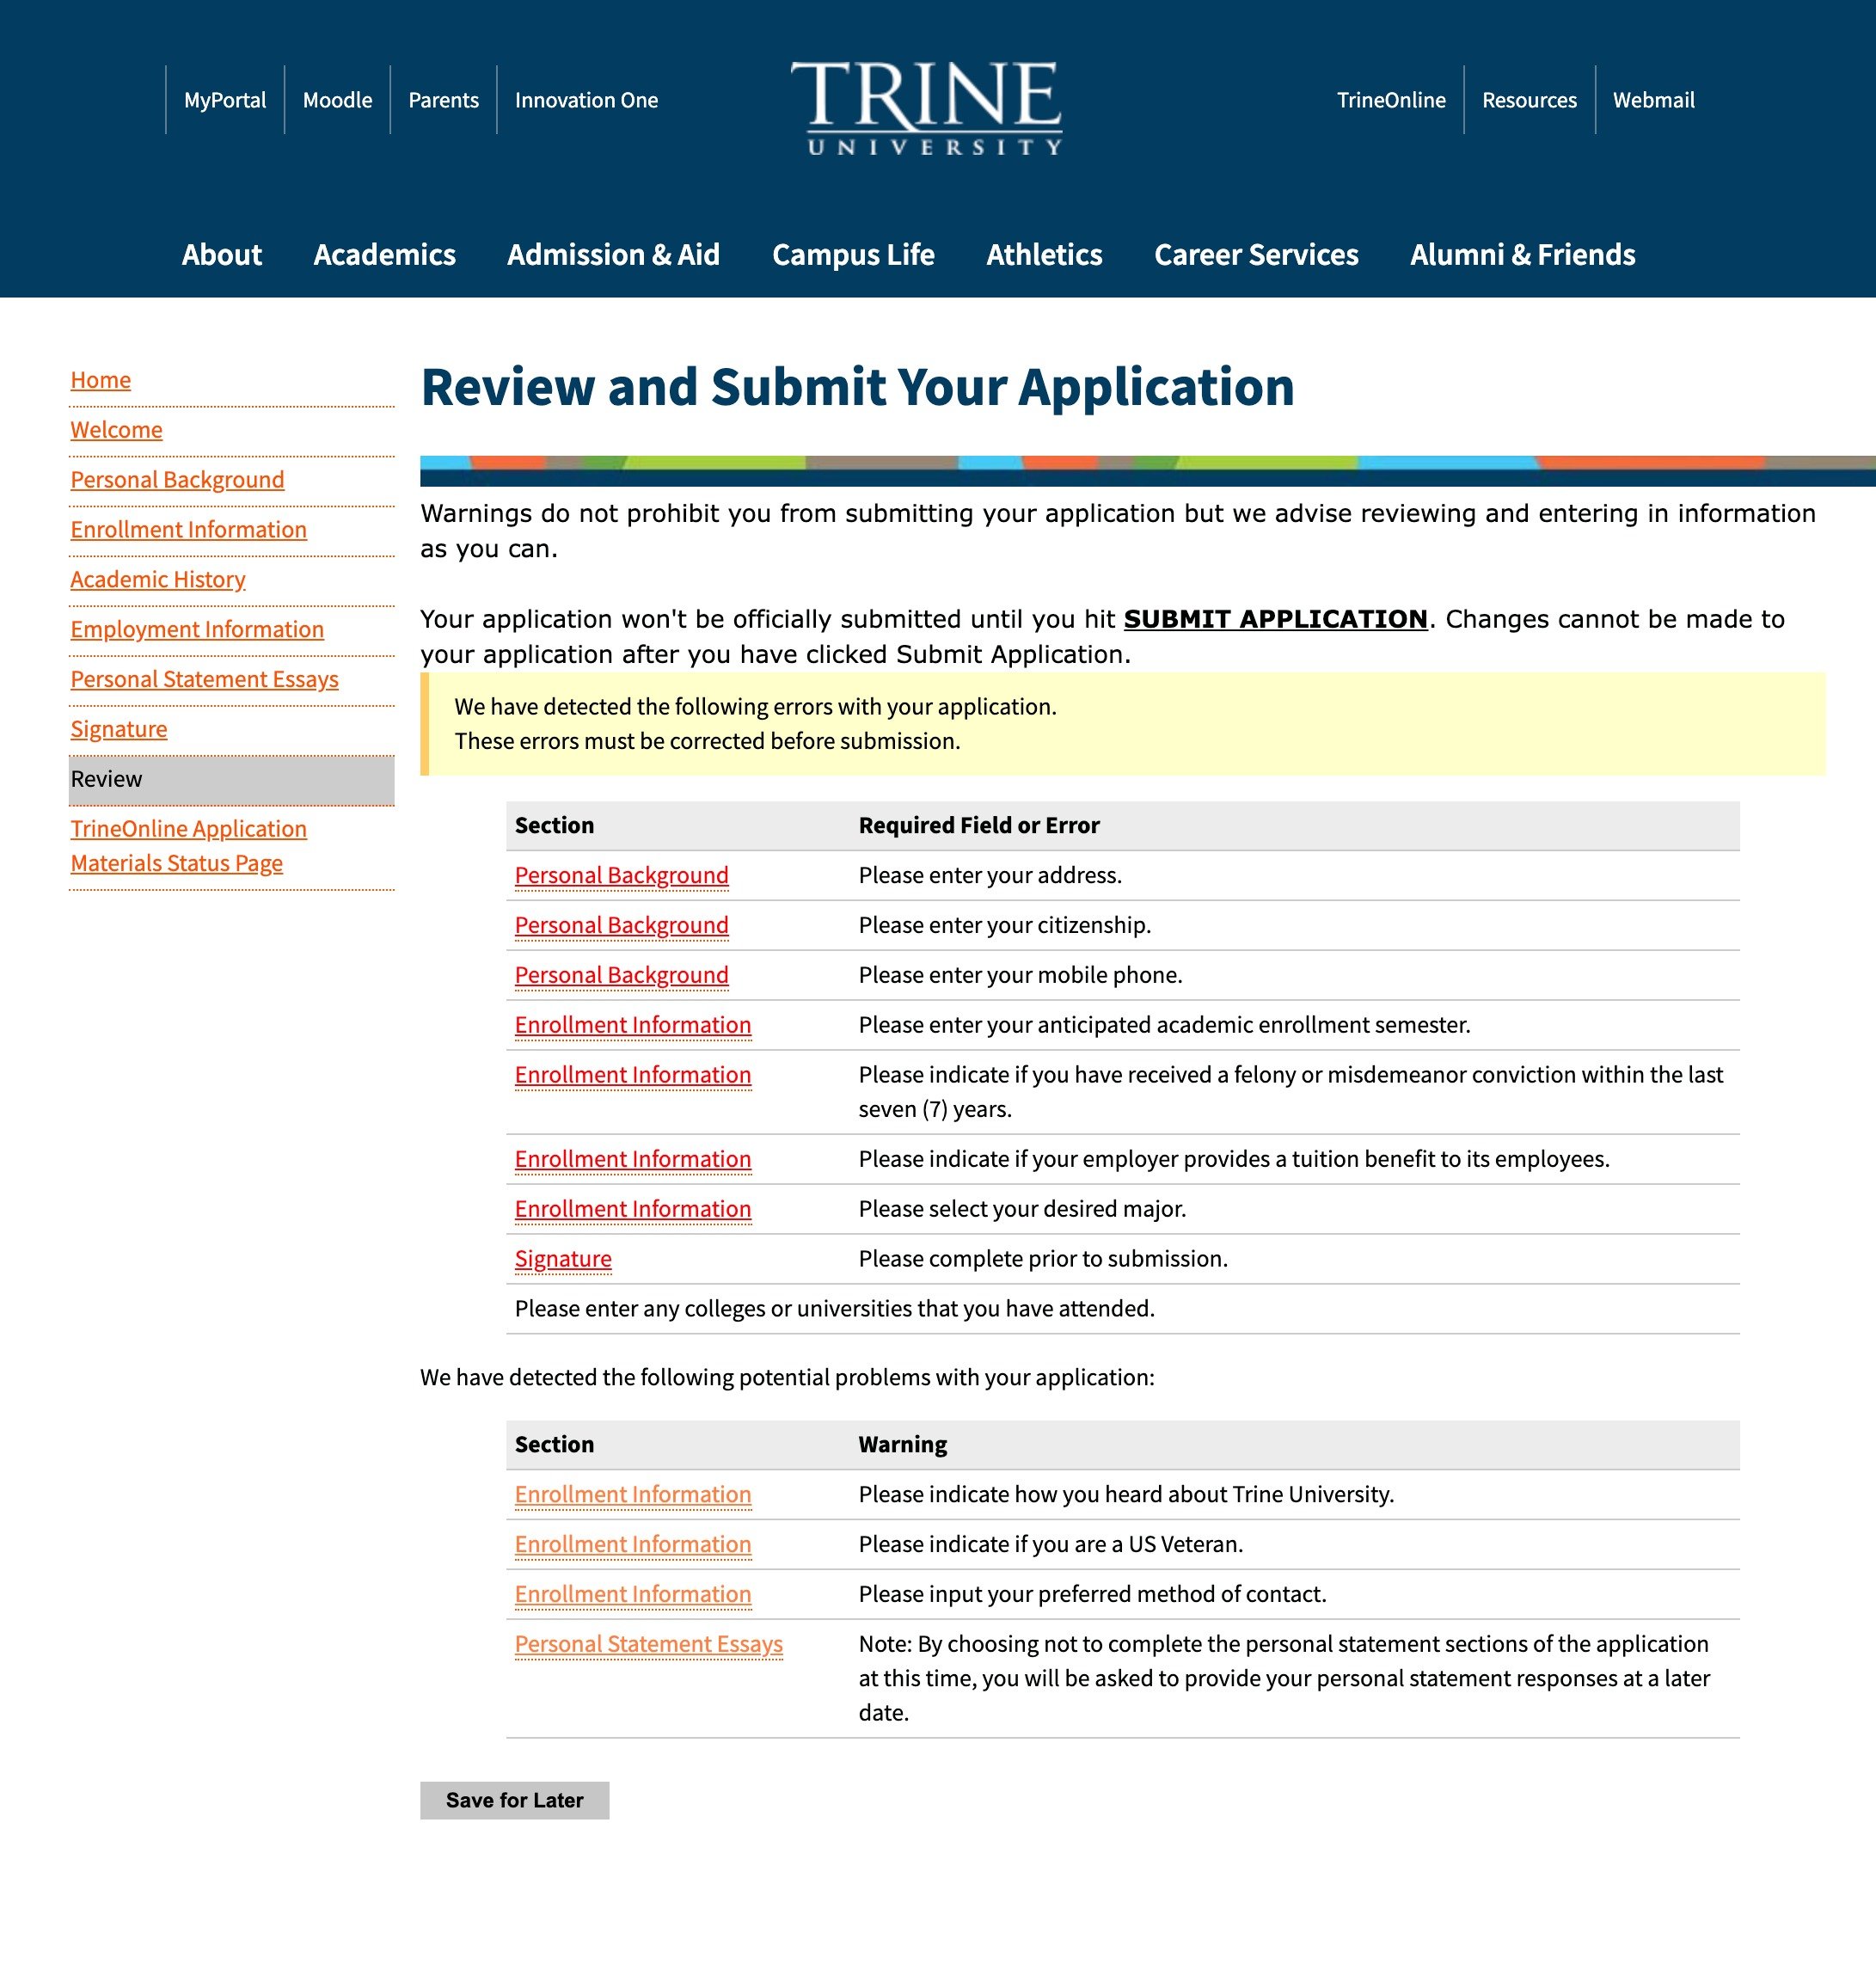 Screen+Capture+023+-+Review+and+Submit+Your+Application+-+connect.trine.edu